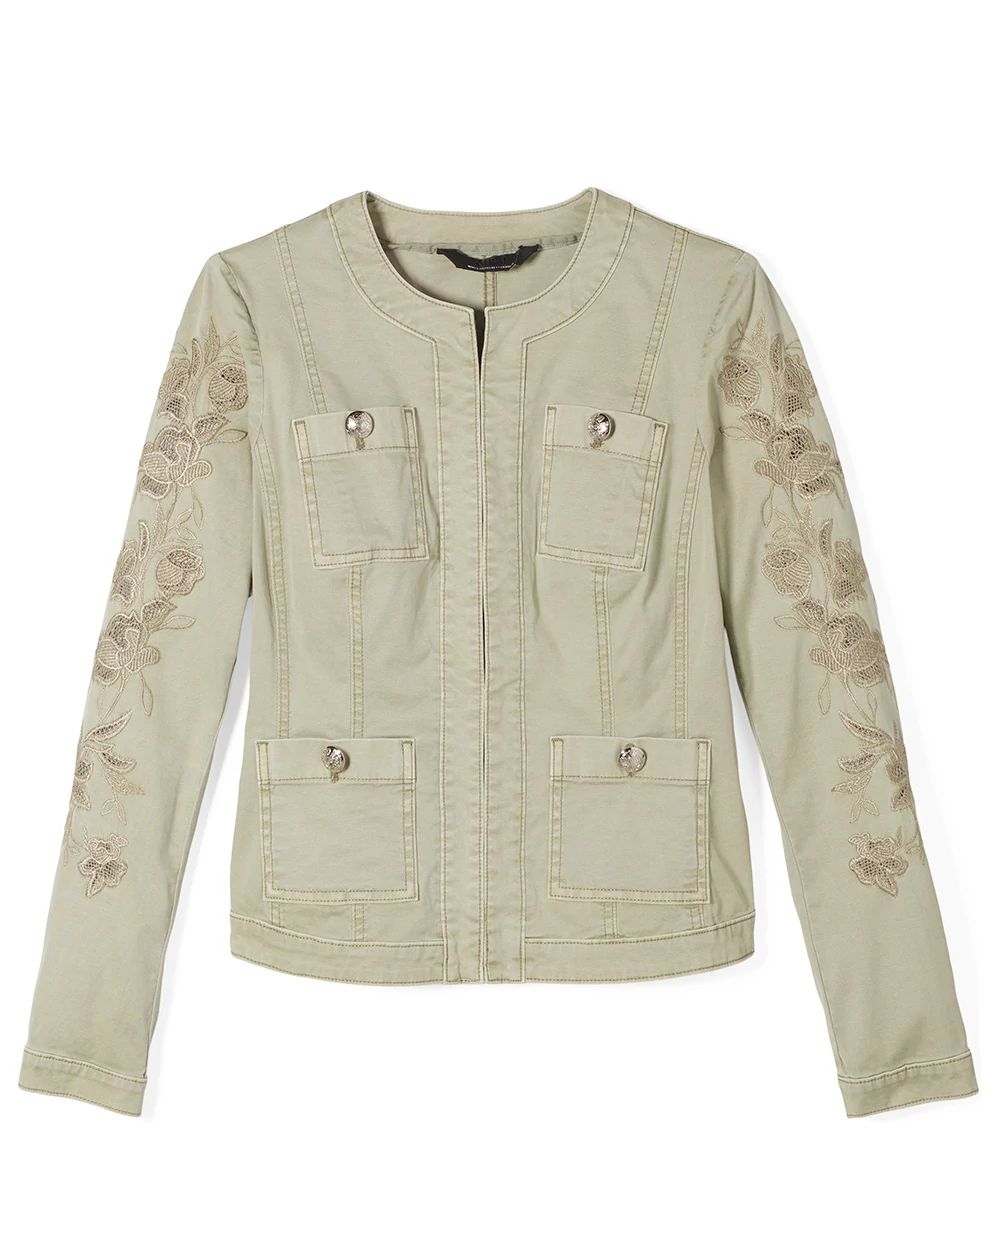 Petite Cutwork WHBM® Stylist Pret Jacket click to view larger image.